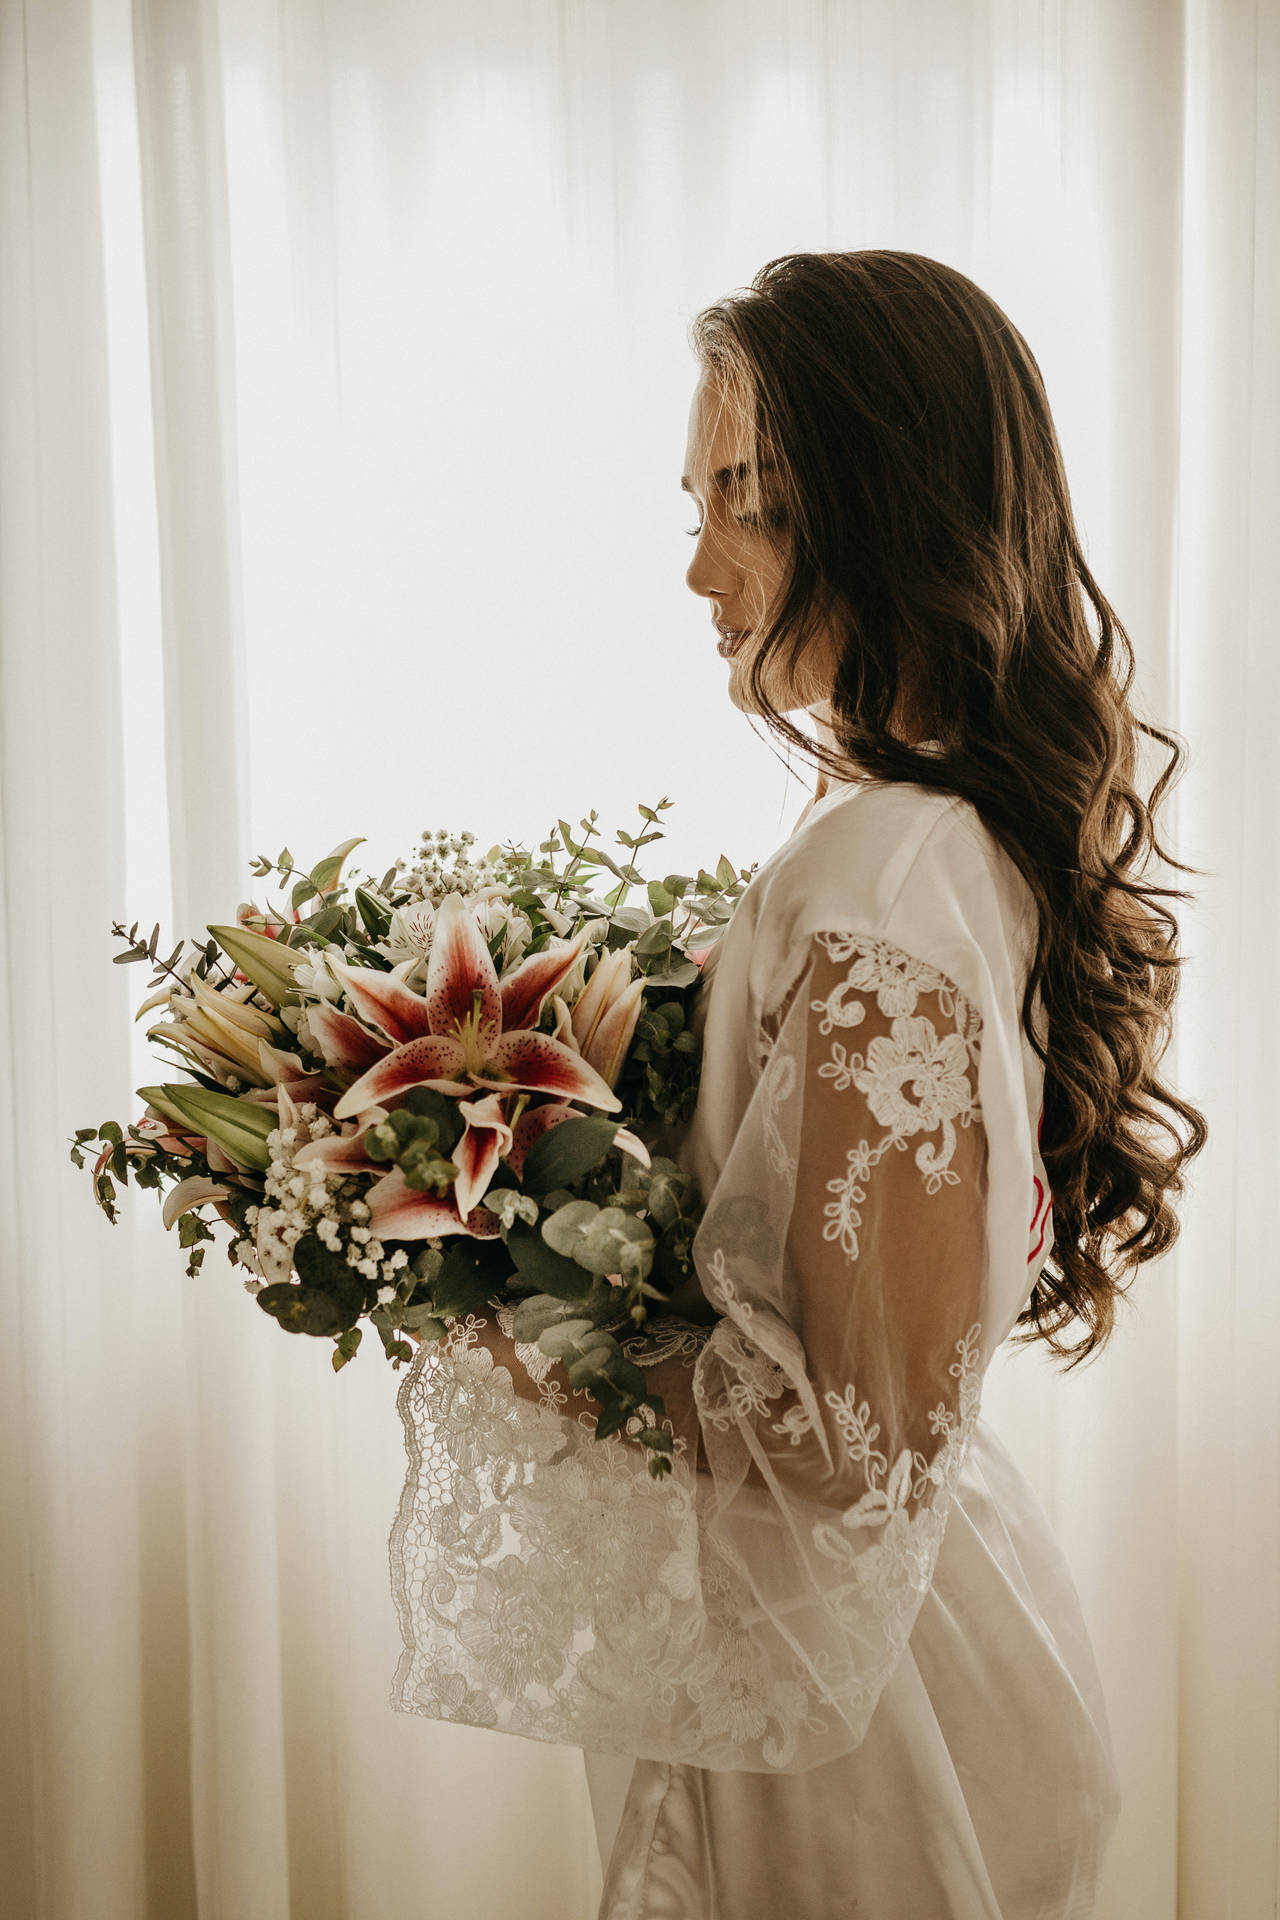 Posing With Bridal Bouquet Wallpaper